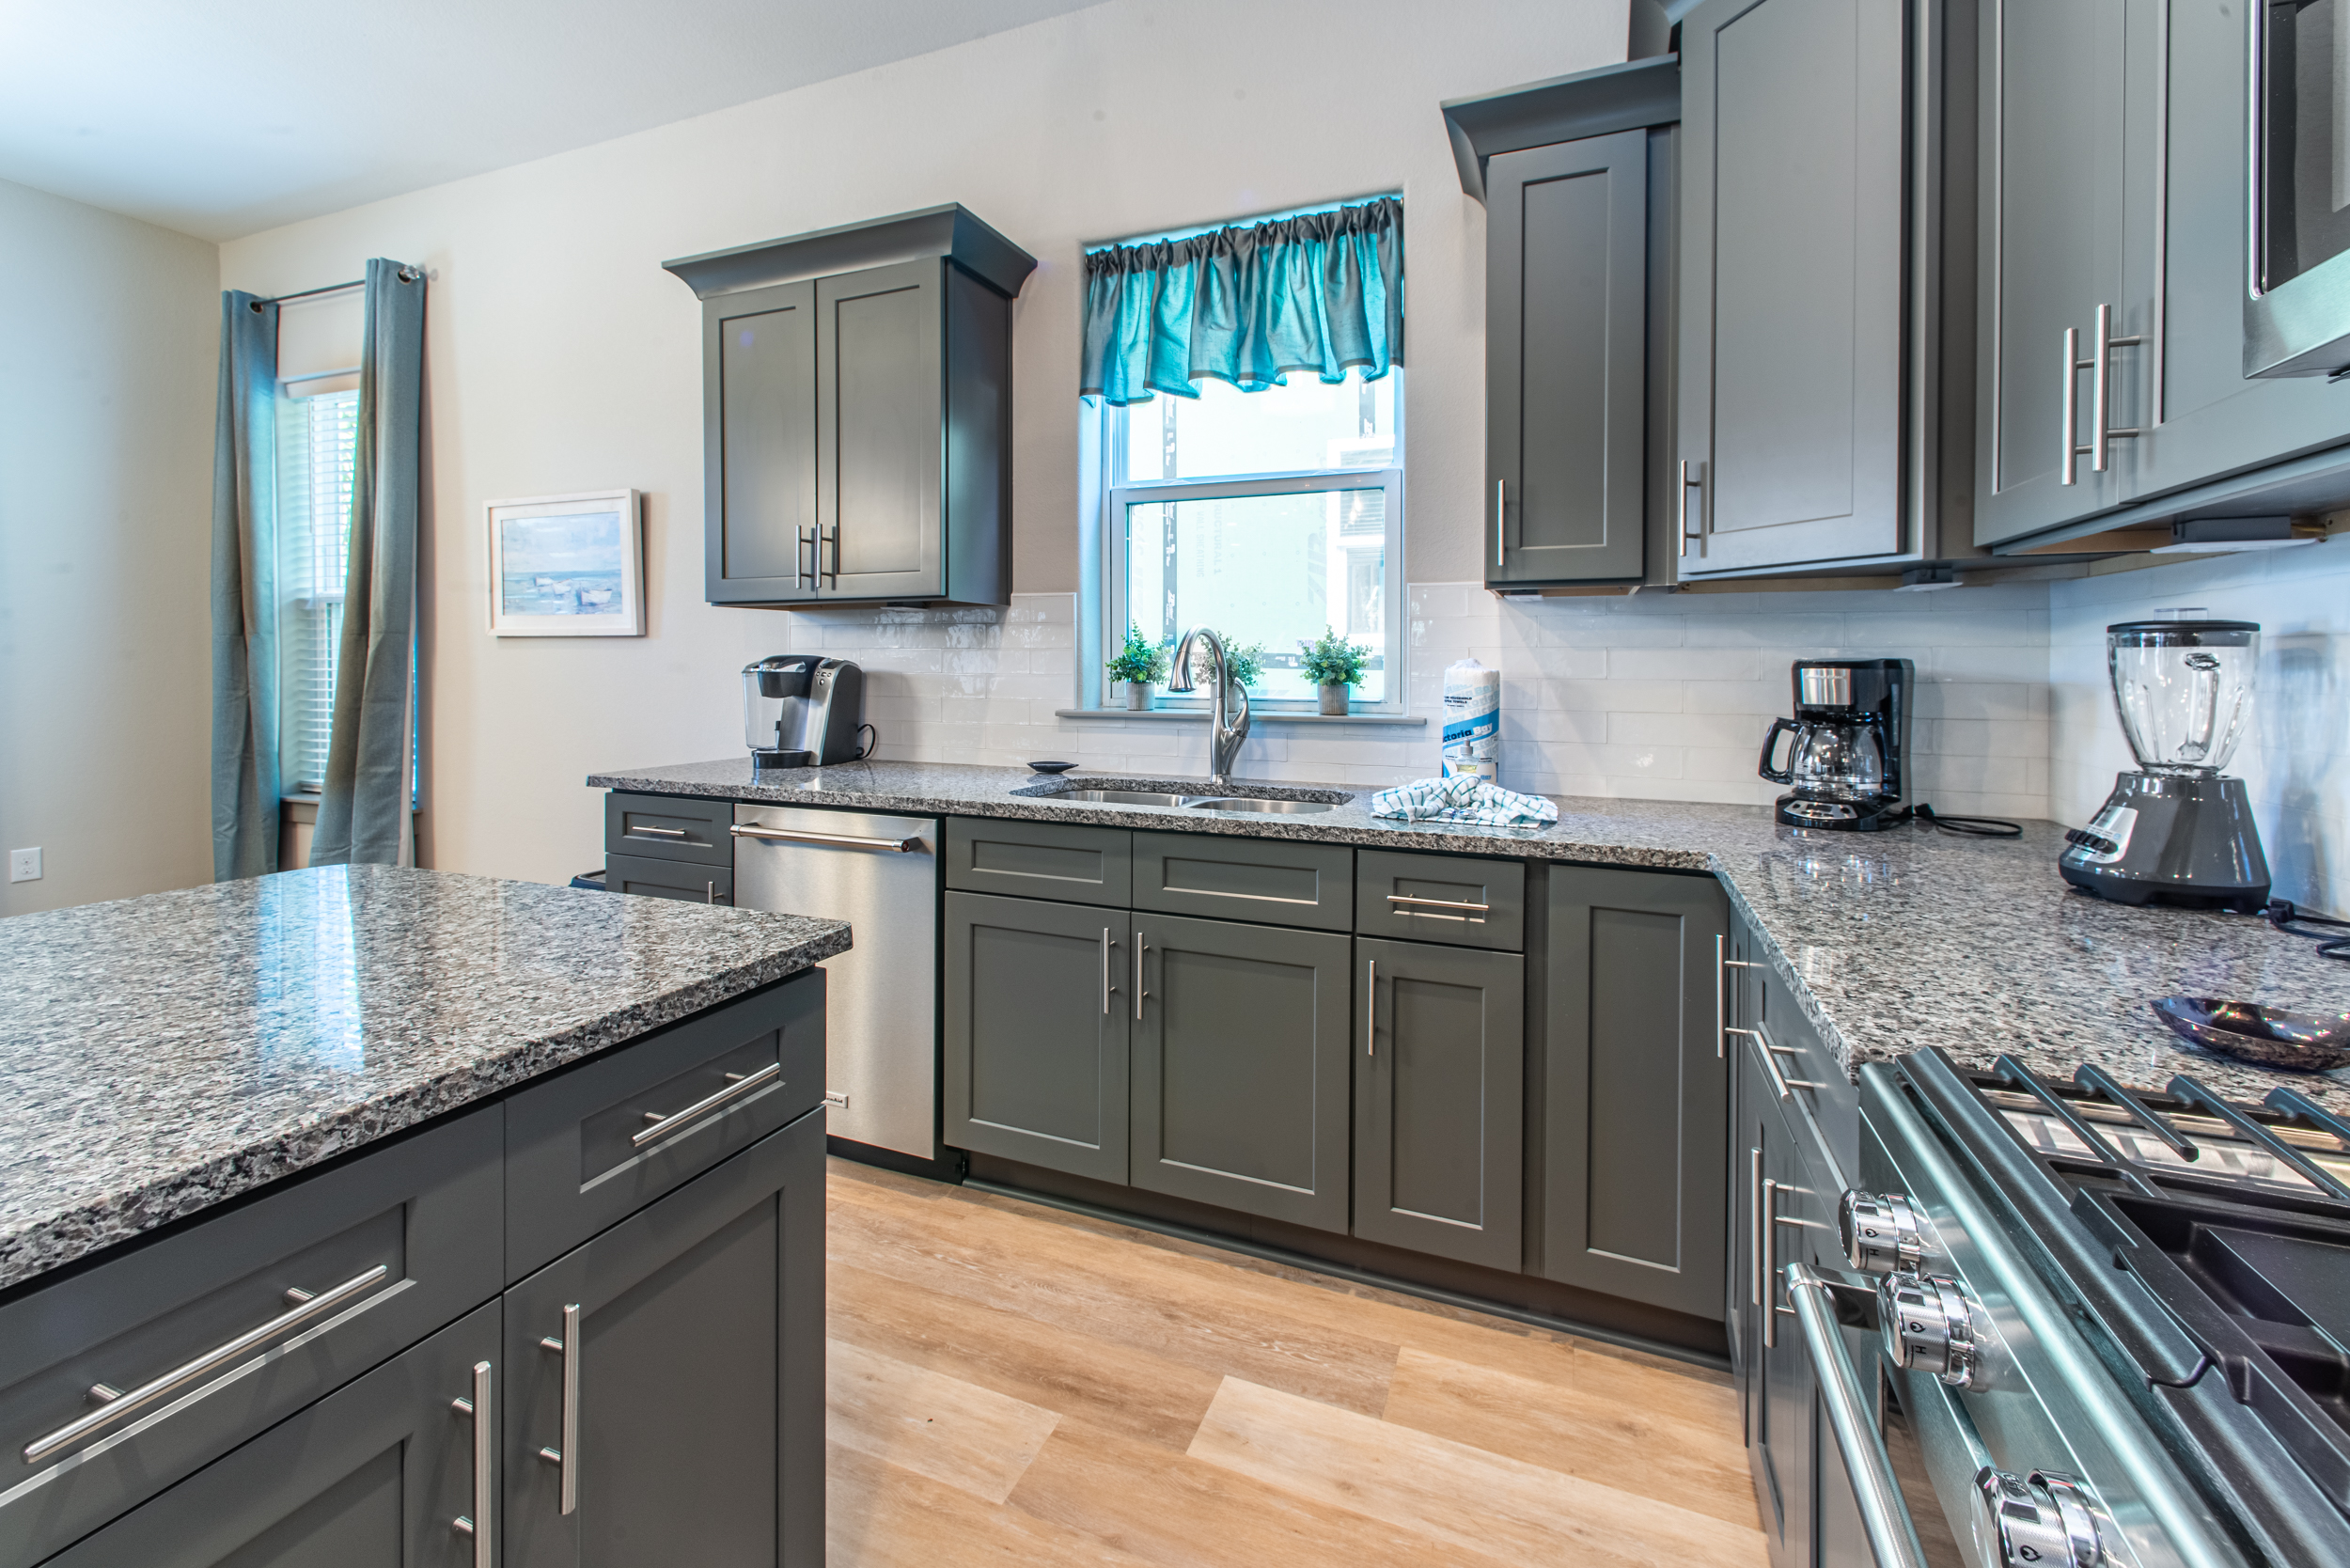 Plenty of space on these Granite counter tops